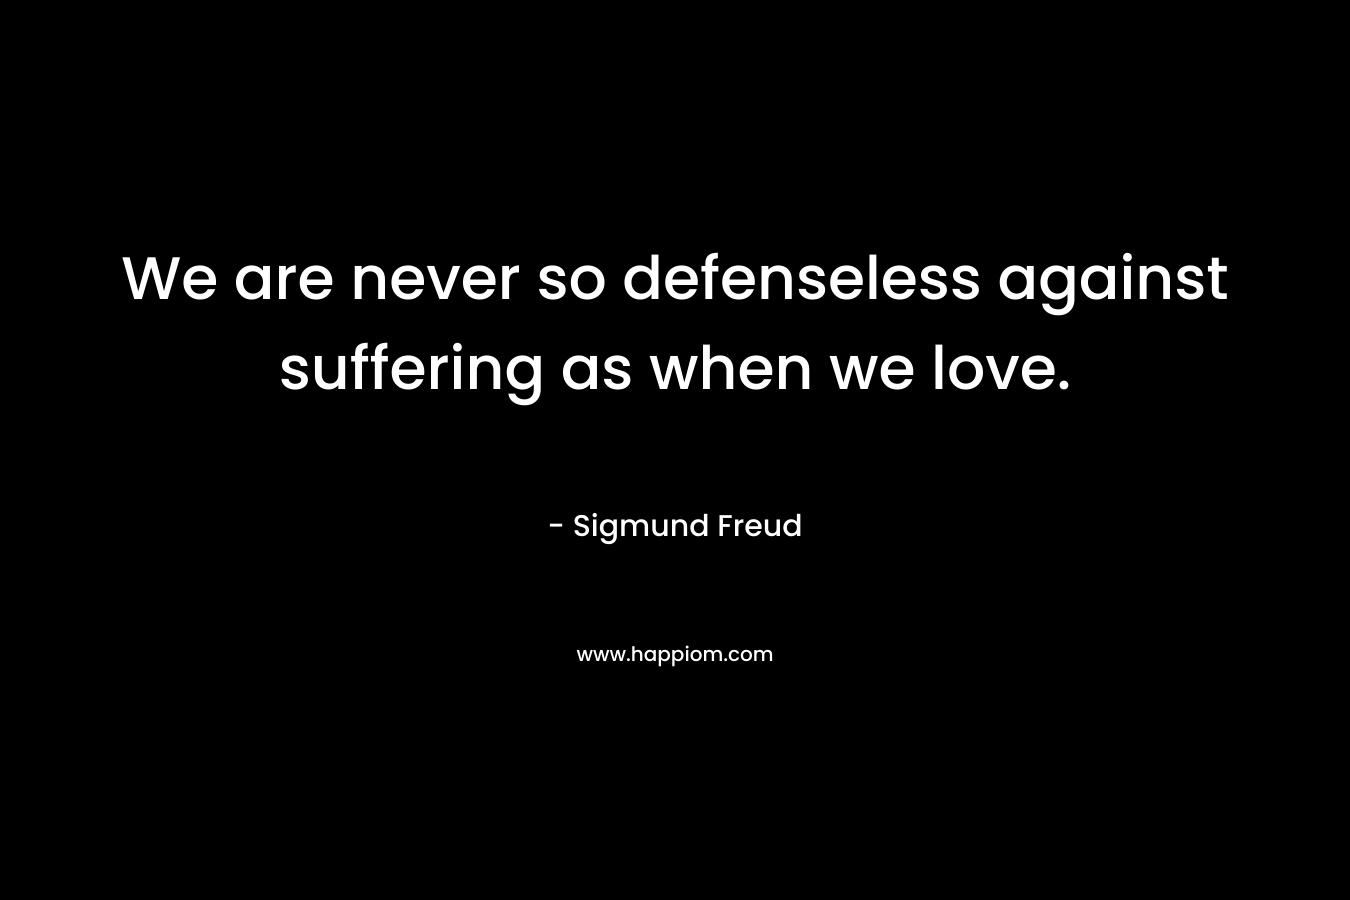 We are never so defenseless against suffering as when we love.